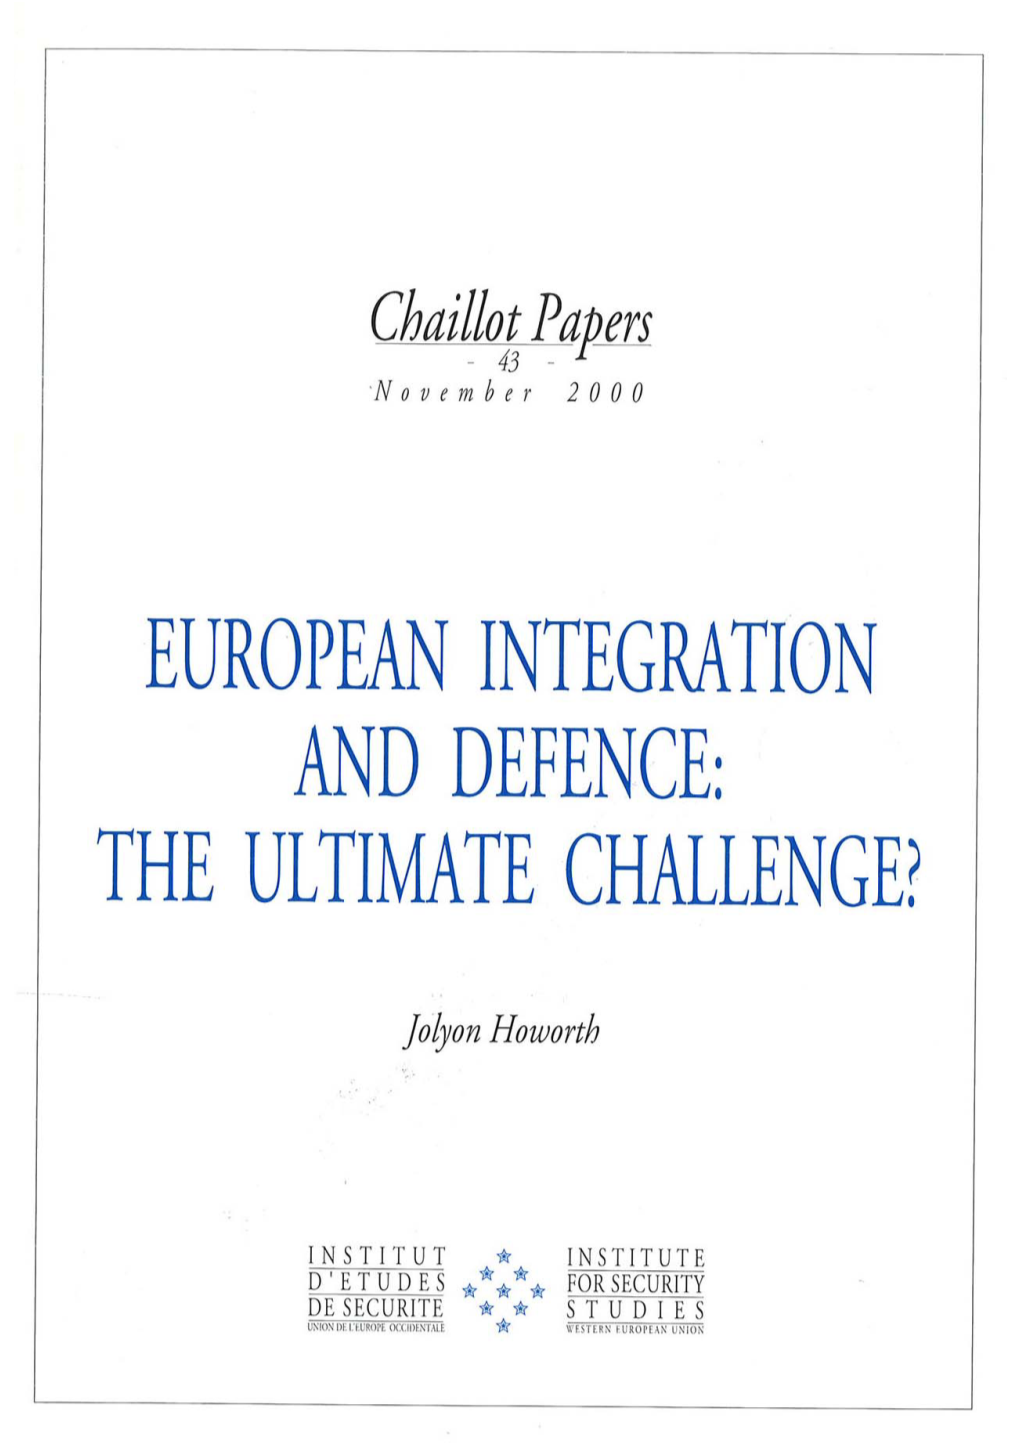 European Integration and Defence: the Ultimate Challenge?